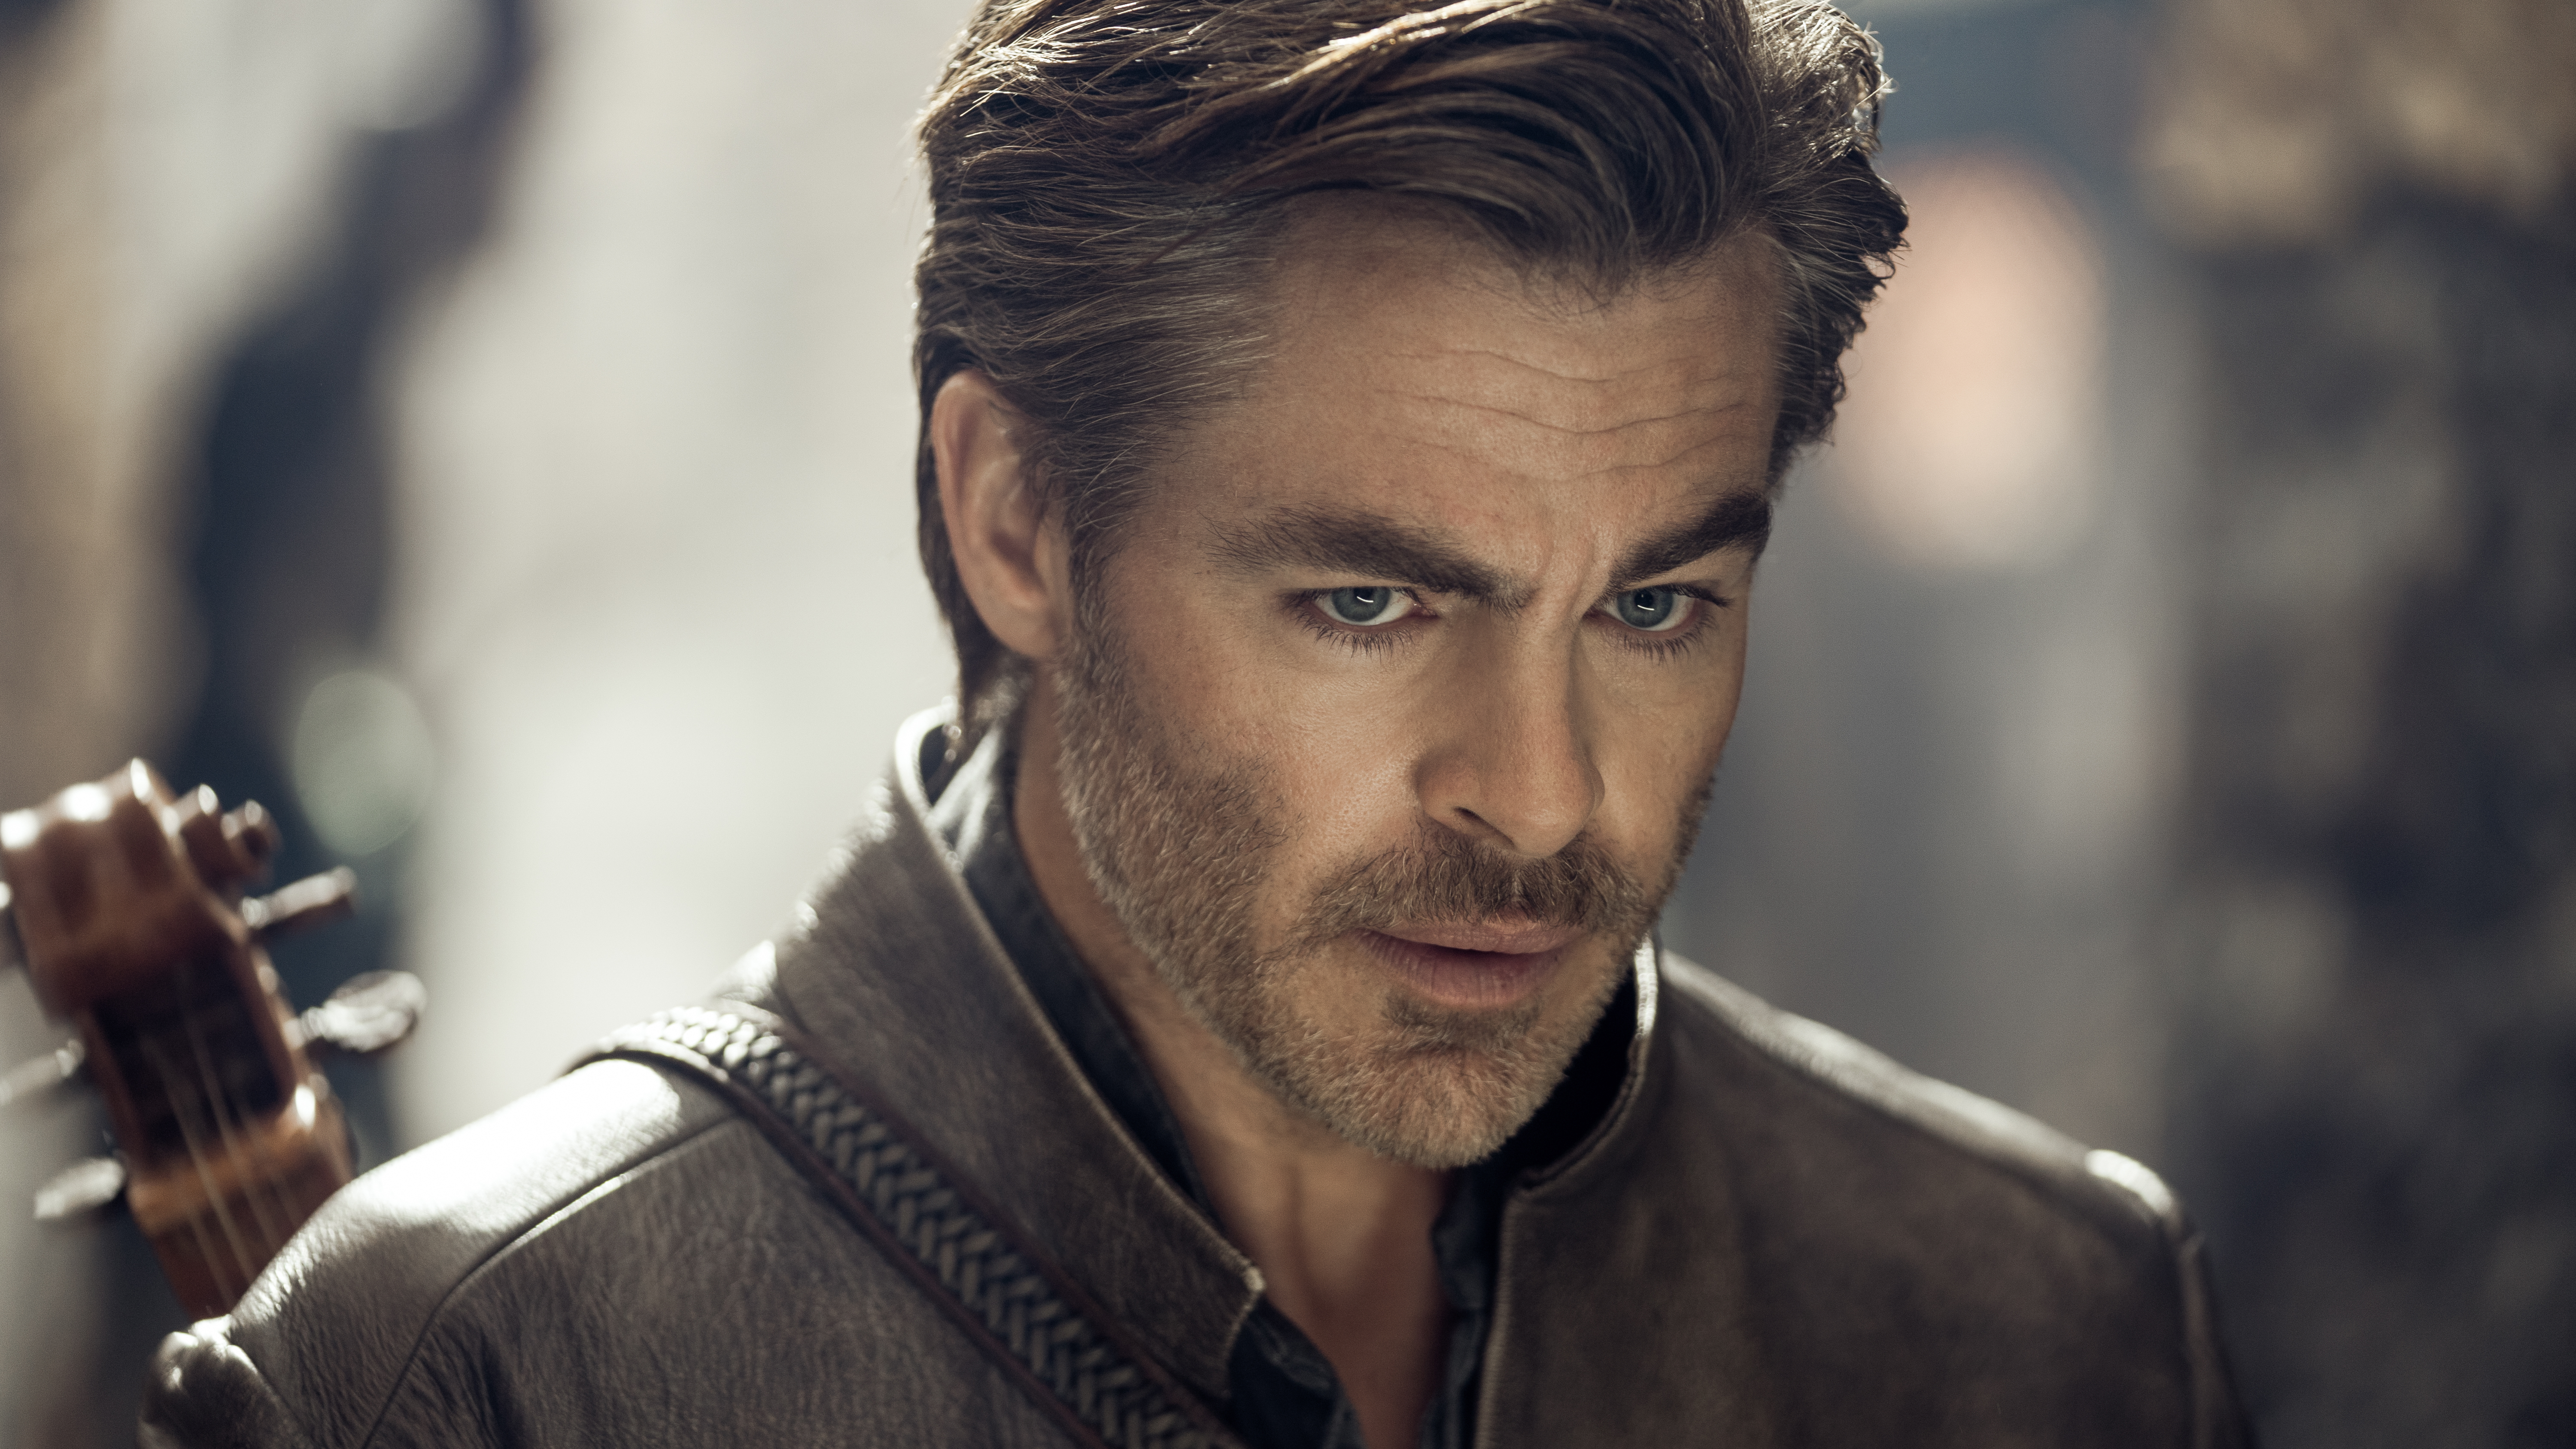 Chris Pine plays Edgin in 'Dungeons & Dragons: Honor Among Thieves'. Image: Paramount Pictures / eOne / Supplied